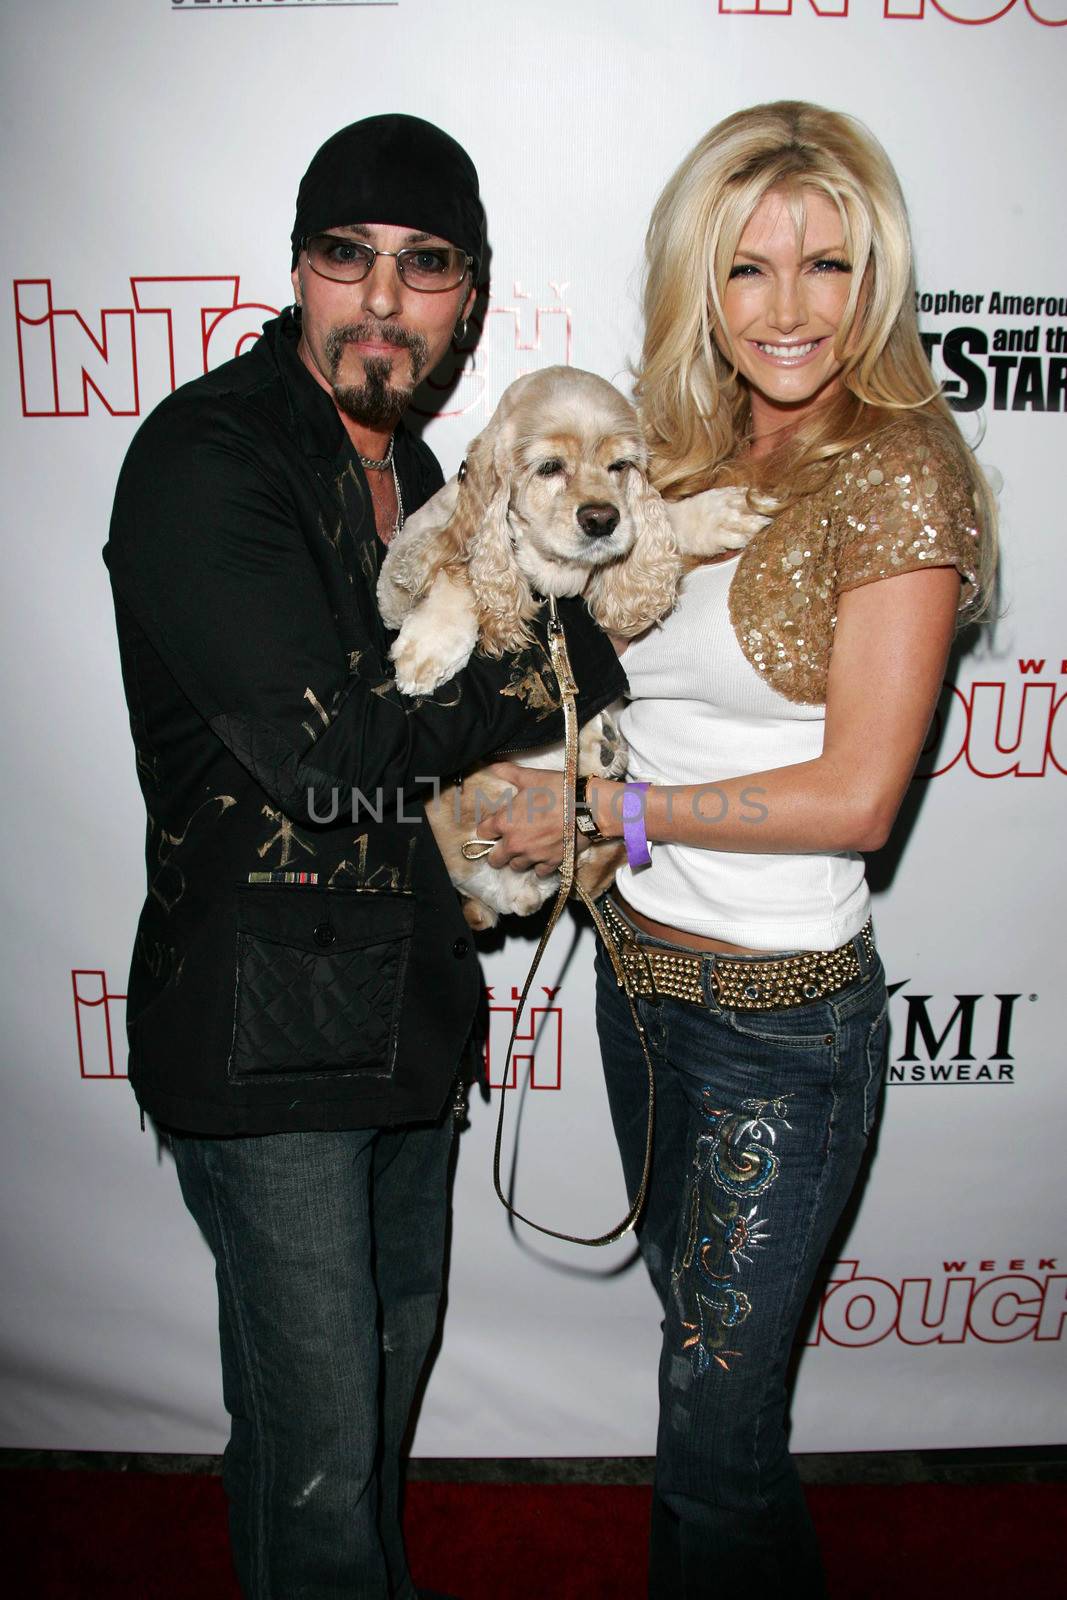 Christopher Amerouso and Brande Roderick at the In Touch Presents Pets And Their Stars Party, Cabana Club, Hollywood, CA 09-21-05